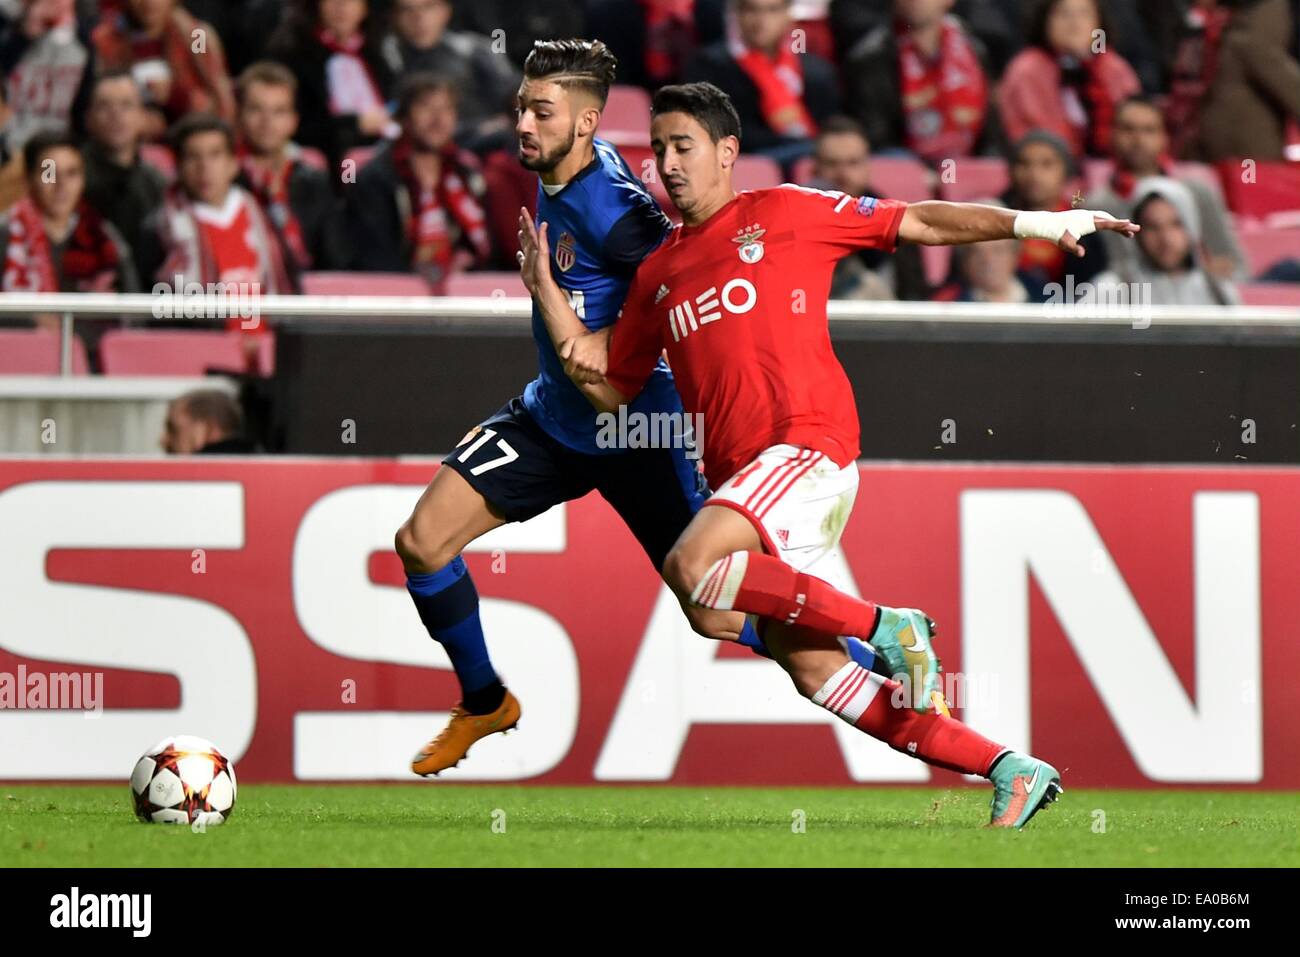 Lisbon, Portugal. 4th Nov, 2014. Andre Almeida (R) of Benfica vies with Yannick Ferreira Carrasco of Monaco during their Champions League Group C soccer match in Lisbon, Portugal, on Nov. 4, 2014. Benfica won 1-0. Credit:  Zhang Liyun/Xinhua/Alamy Live News Stock Photo